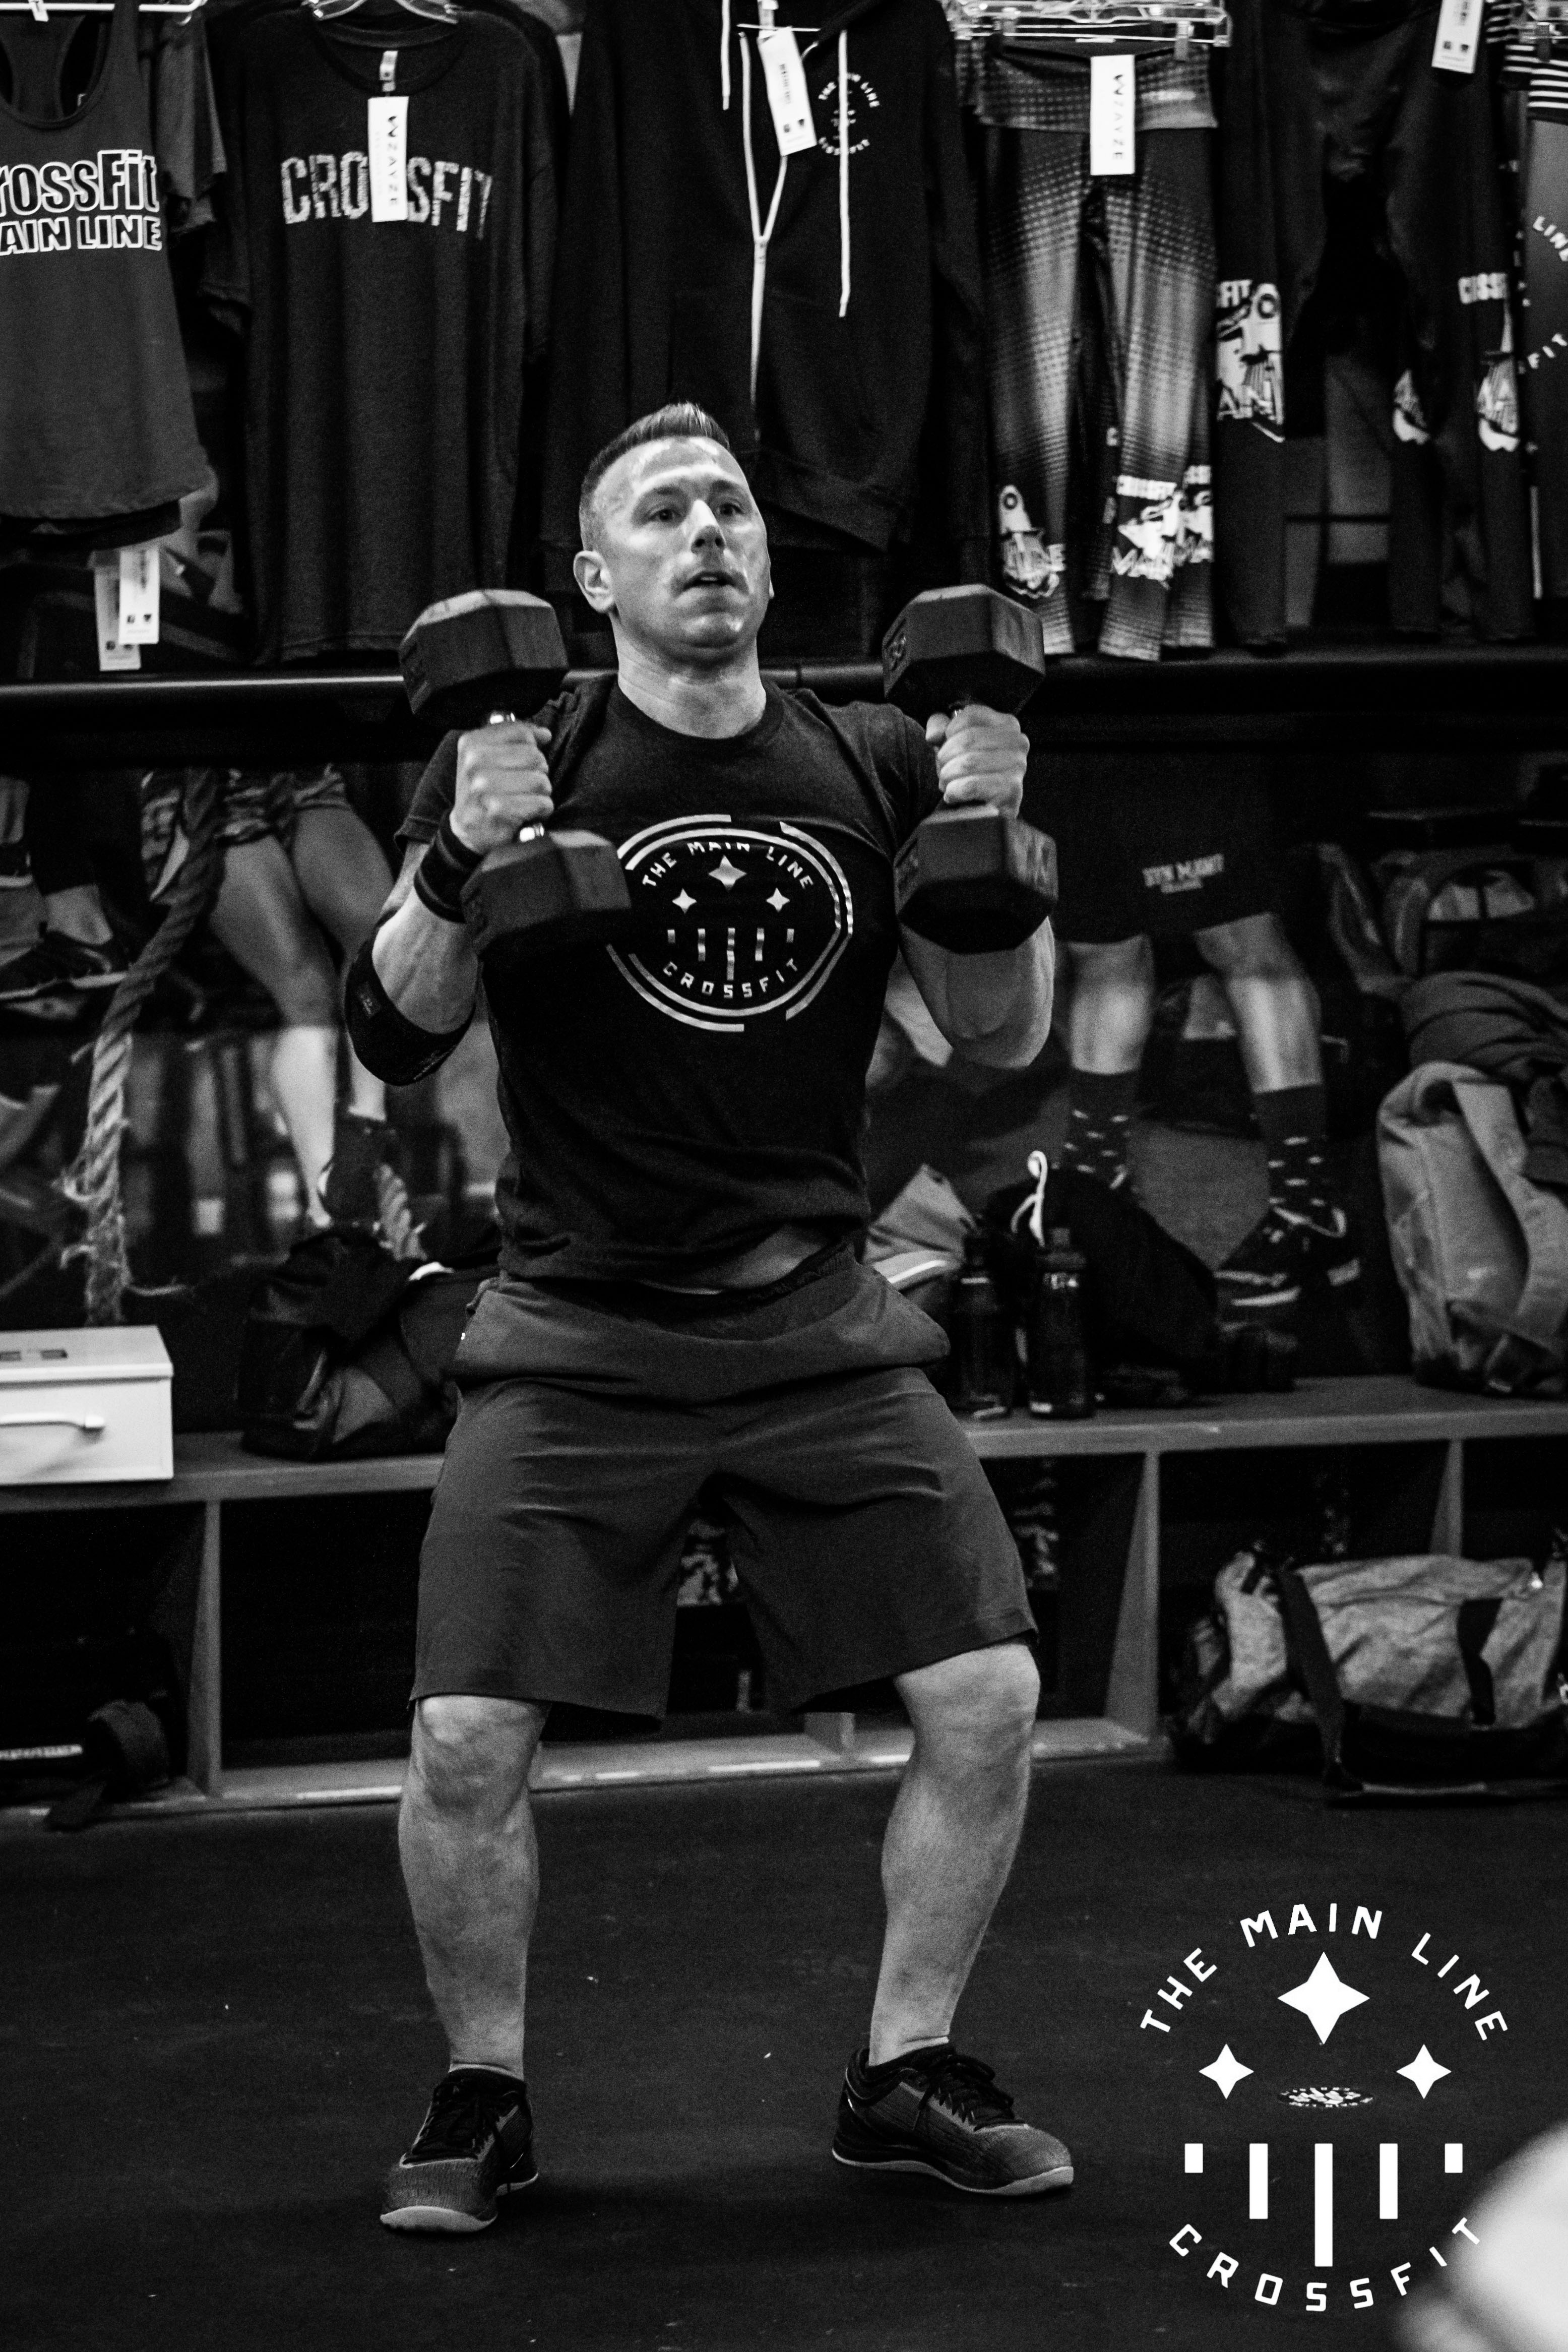 Tuesday 2.5.19 CrossFit